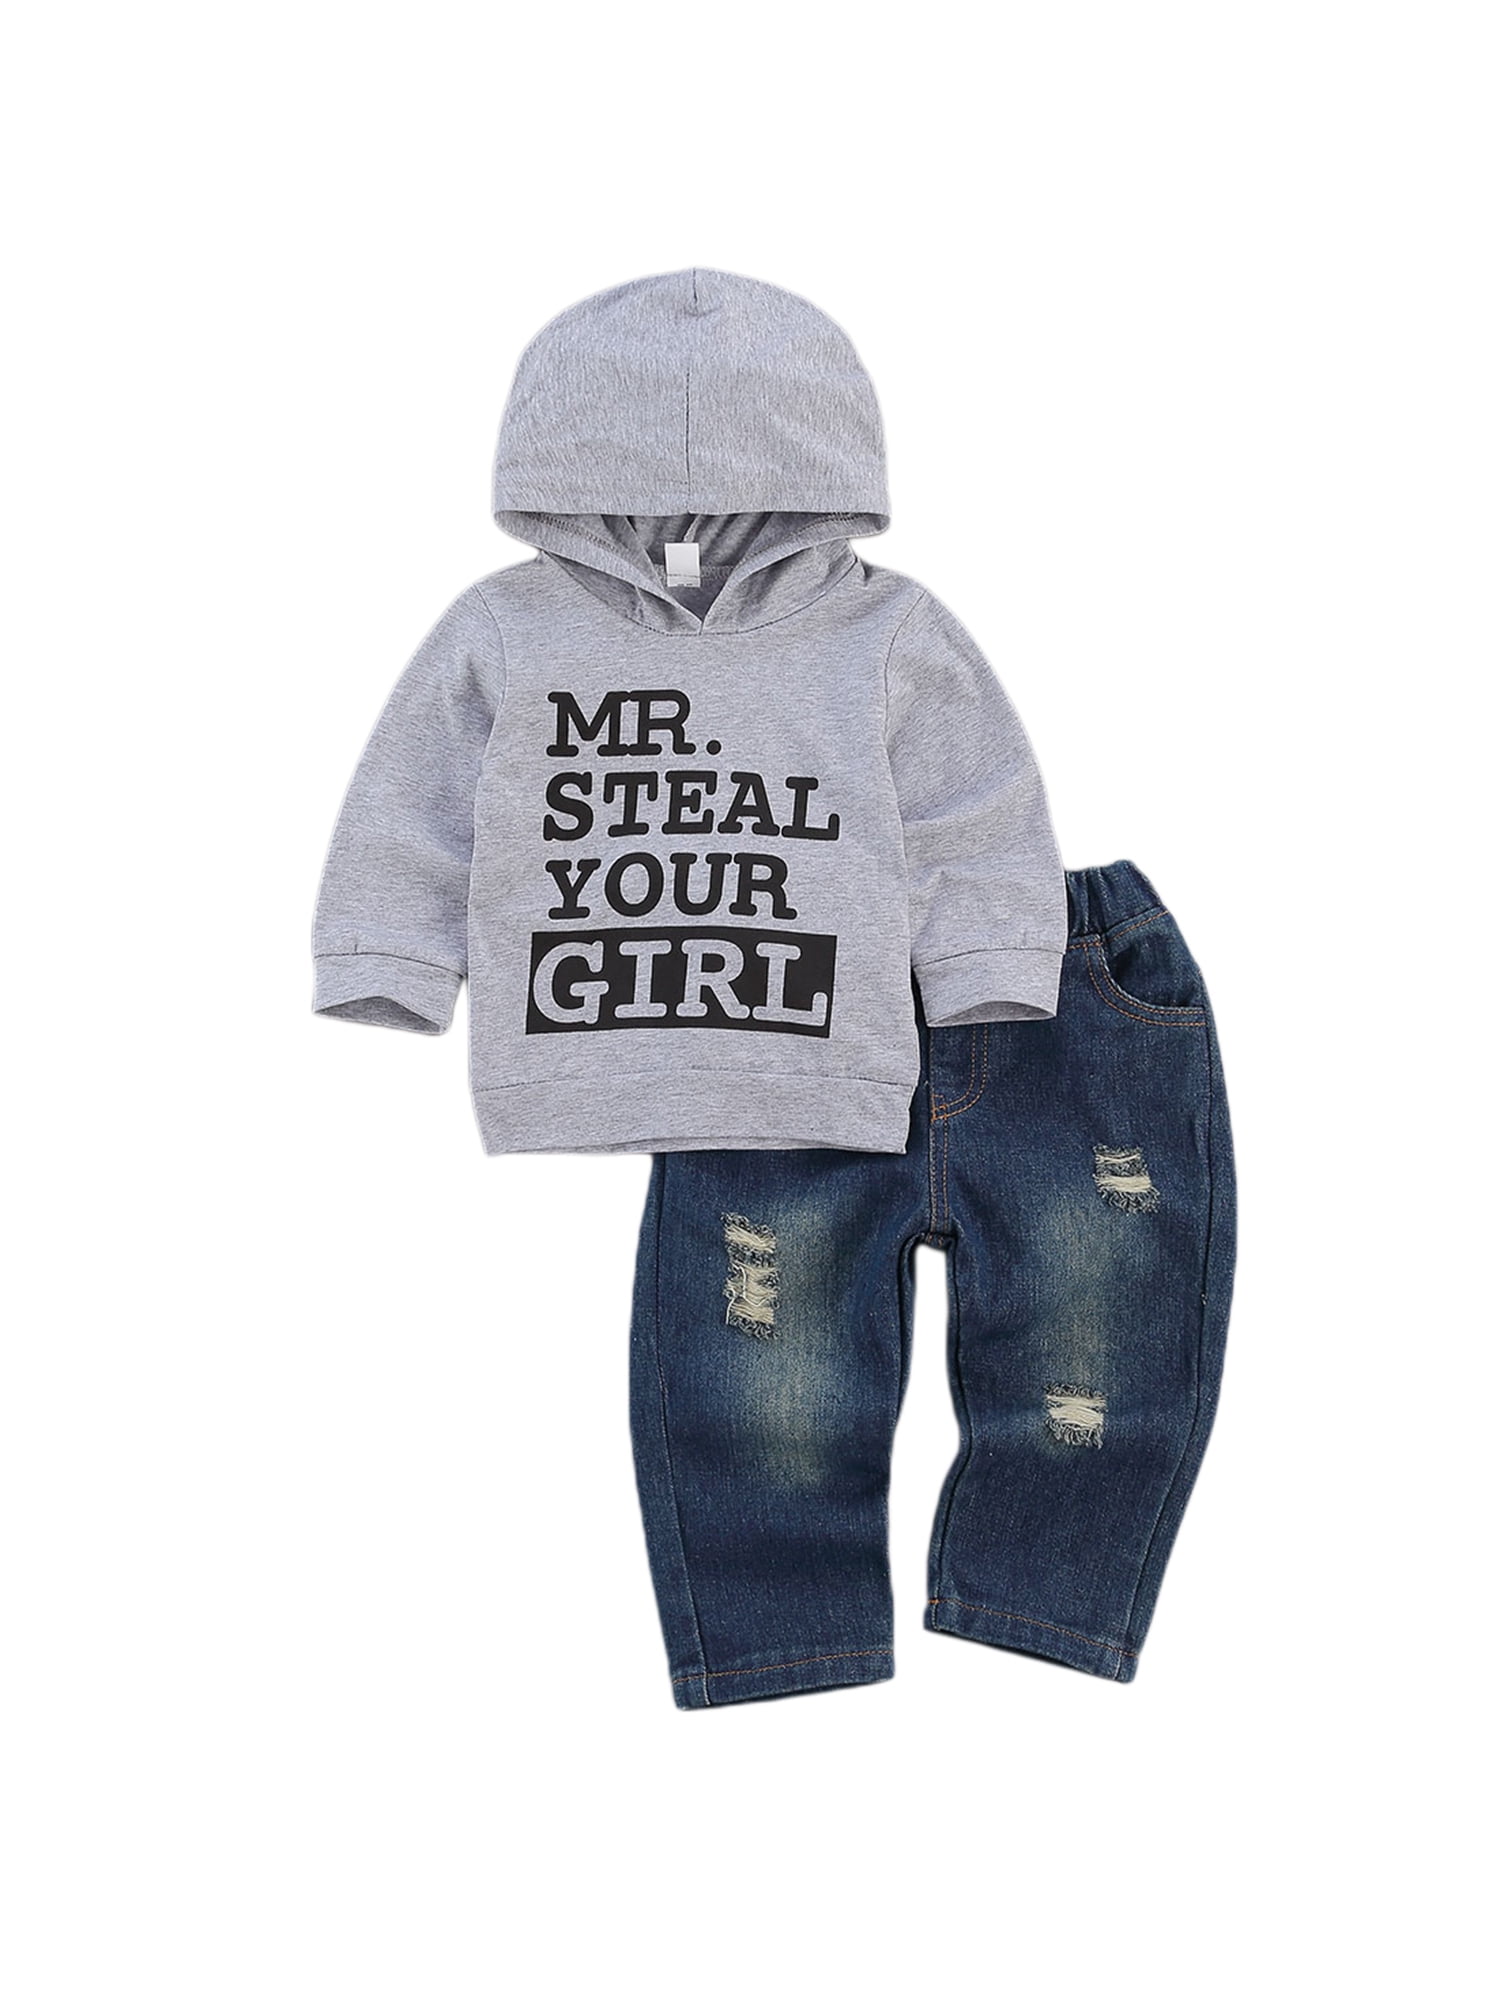 Baby Boys Clothes Aged 12-18 Months Make Your Own Bundle Jeans Tops Sweaters Etc